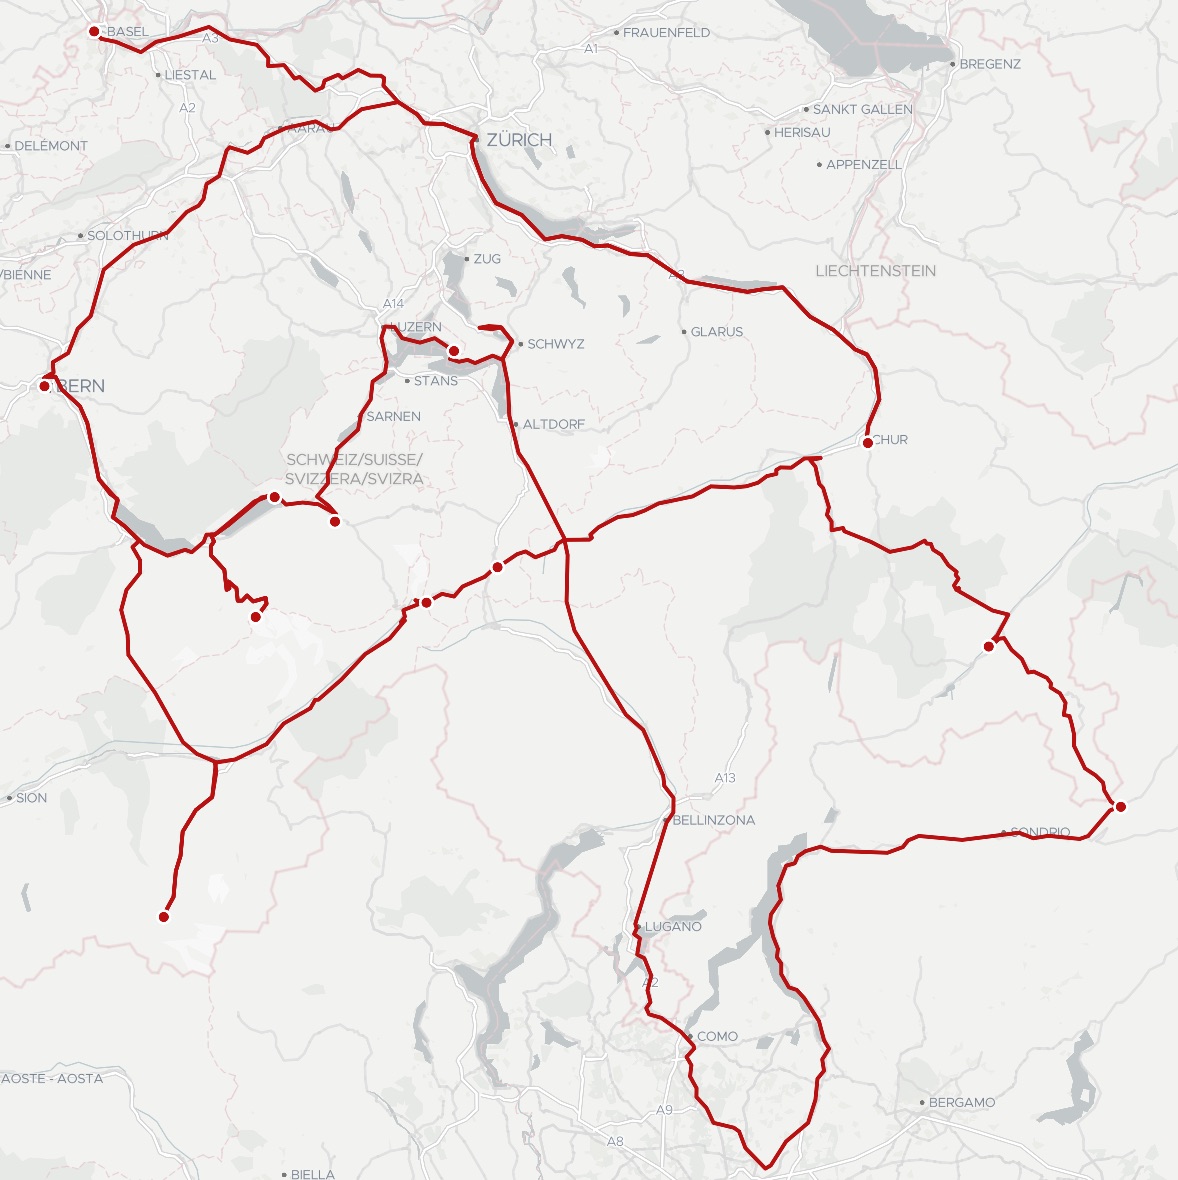 Map of the swiss rail spectacular journey route.